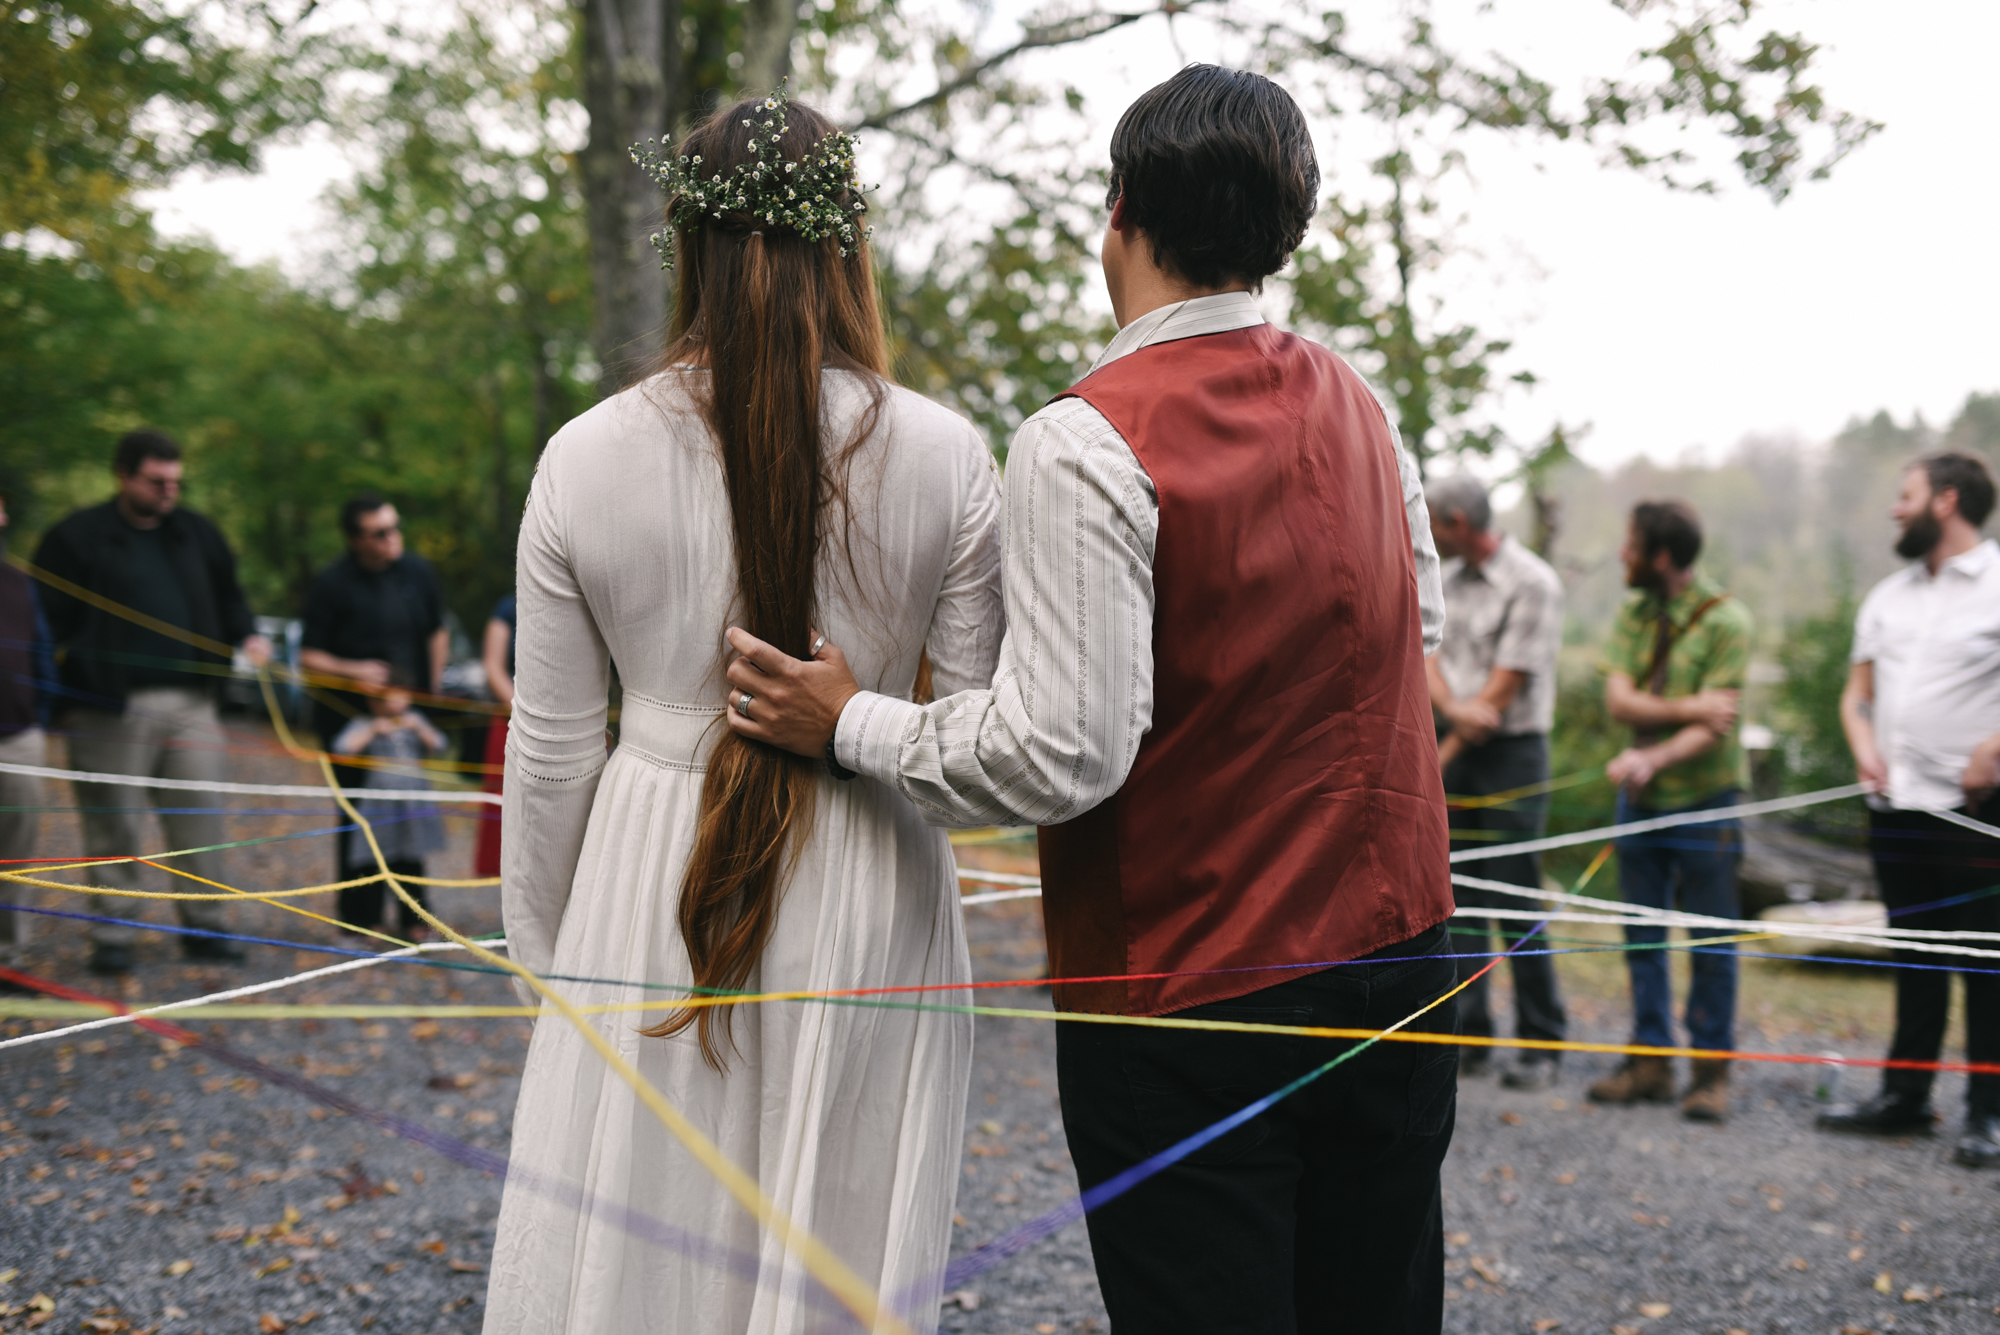  Mountain Wedding, Outdoors, Rustic, West Virginia, Maryland Wedding Photographer, DIY, Casual, bride and groom from behind in circle of guests, yarn weaving ceremony 